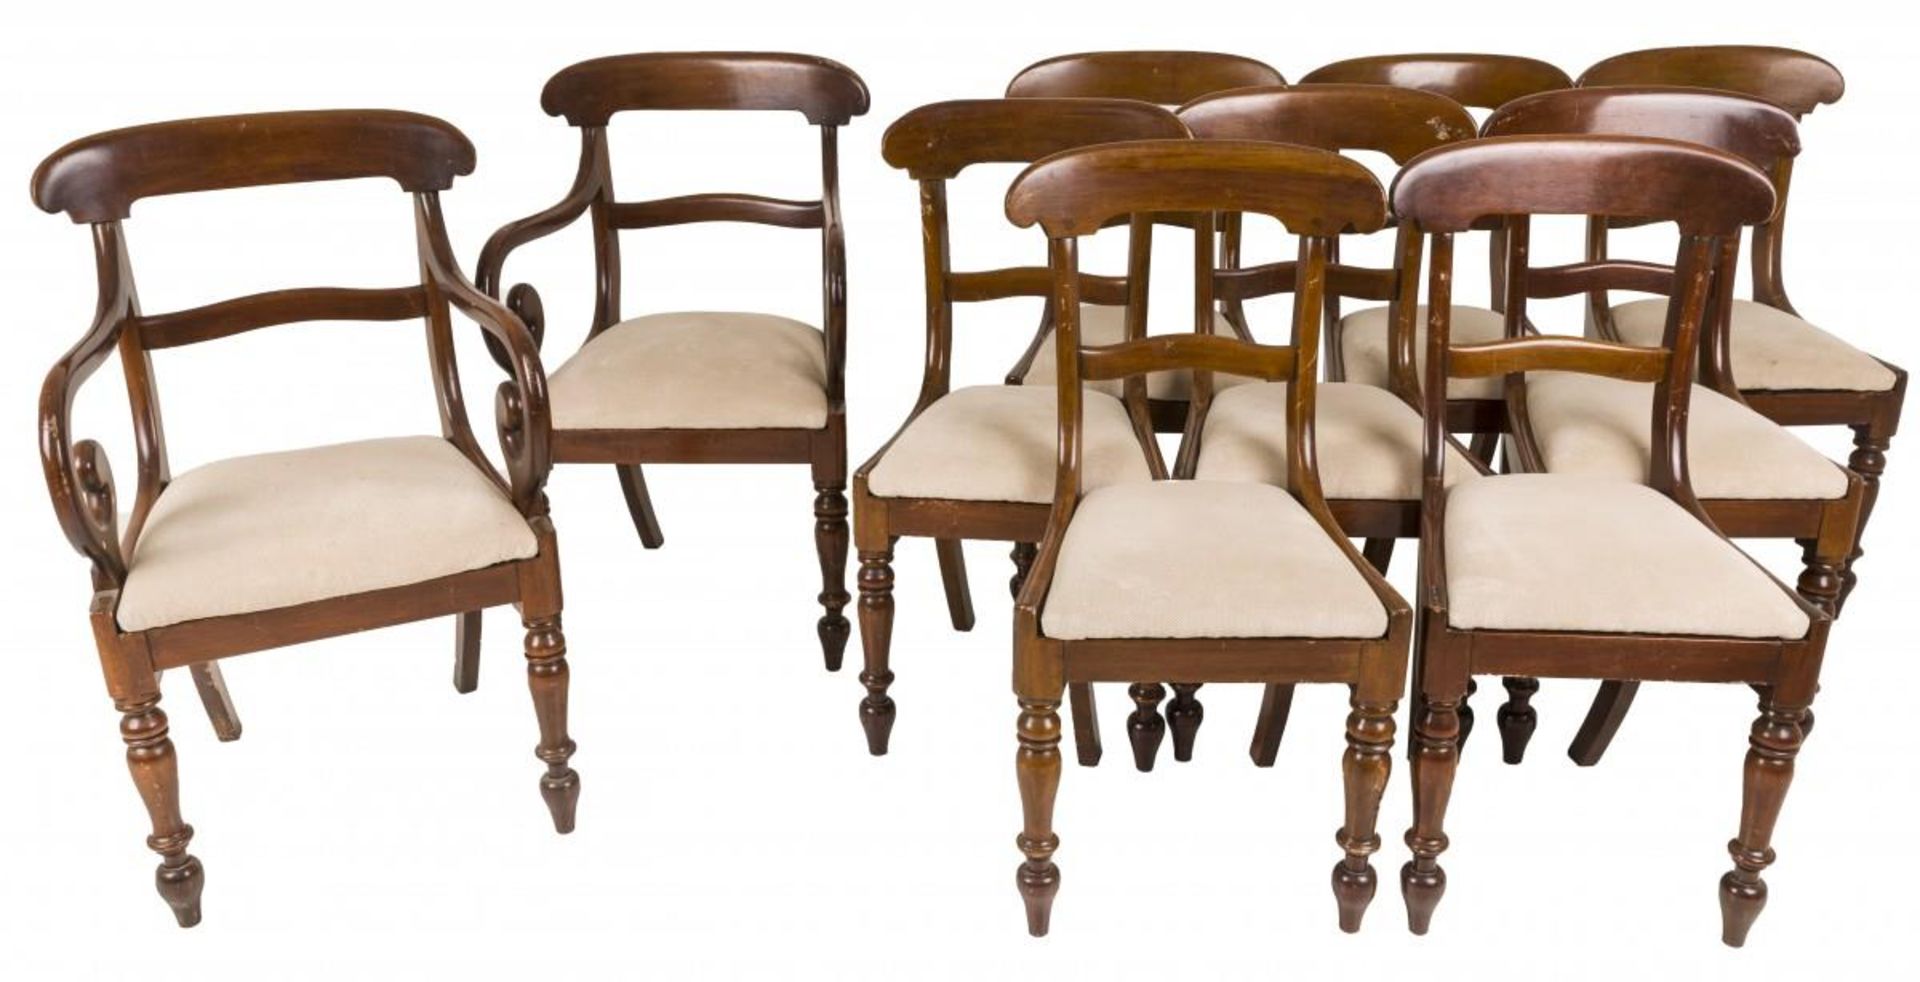 A set of 10 Regency style mahogany dining chairs with beige upholstery, two of which with arm rests.